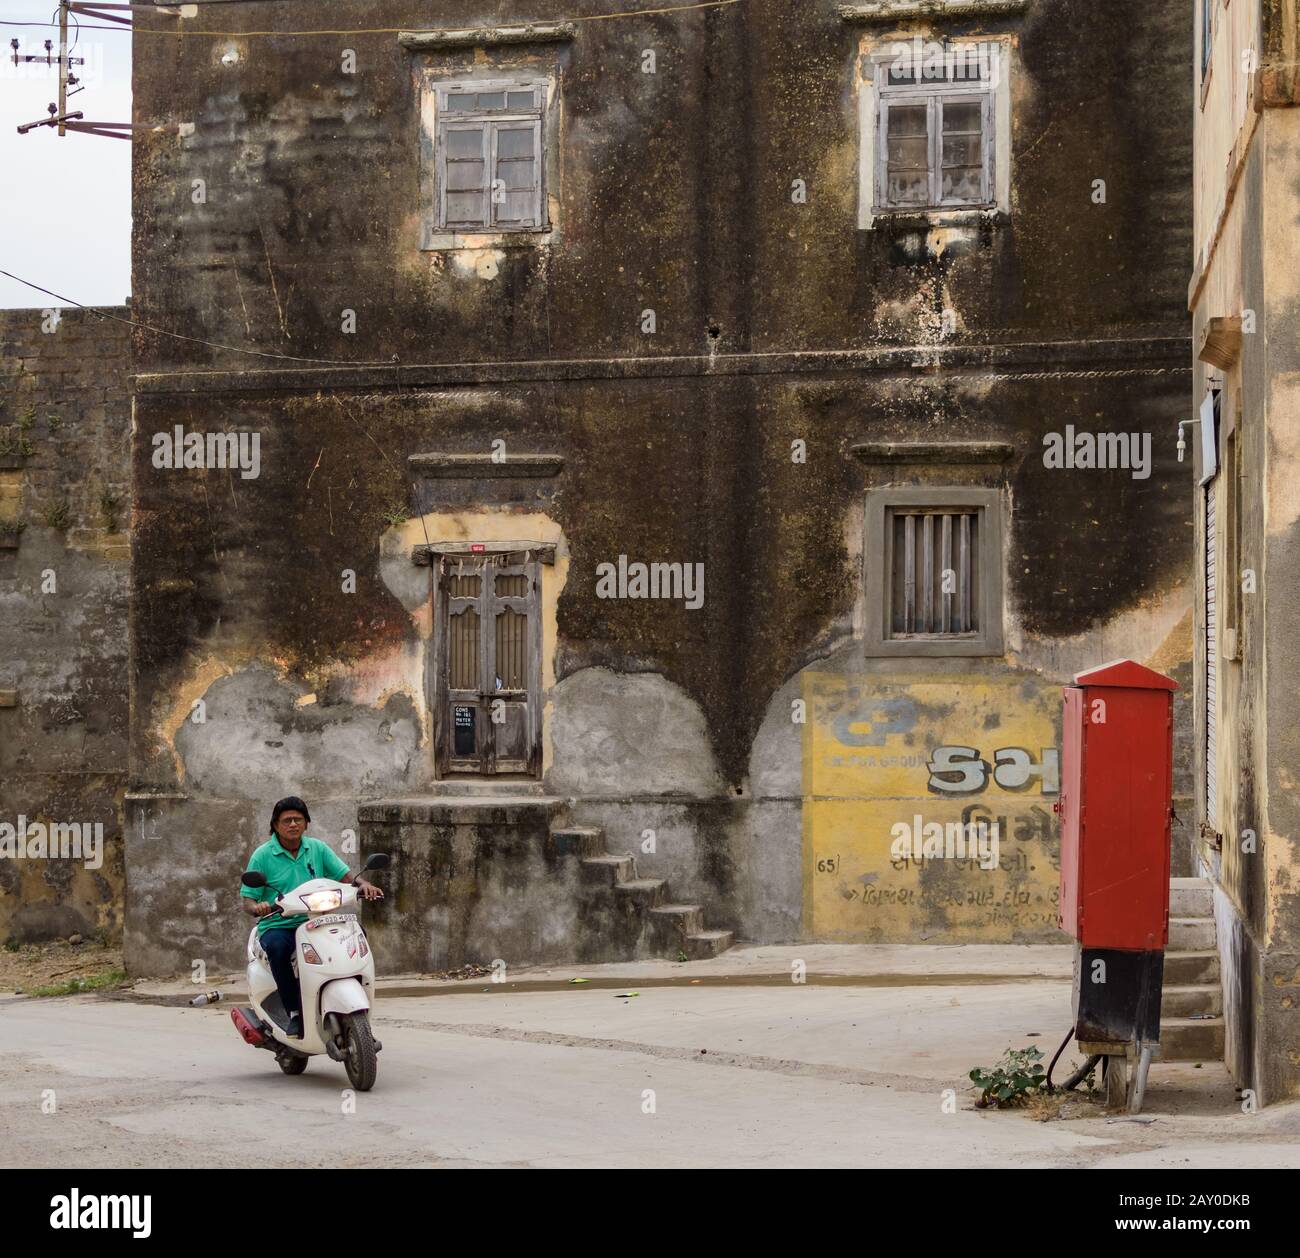 Diu, India - December 2018: A man rides a scooter through the quiet streets and faded buildings in the island of Diu. Stock Photo